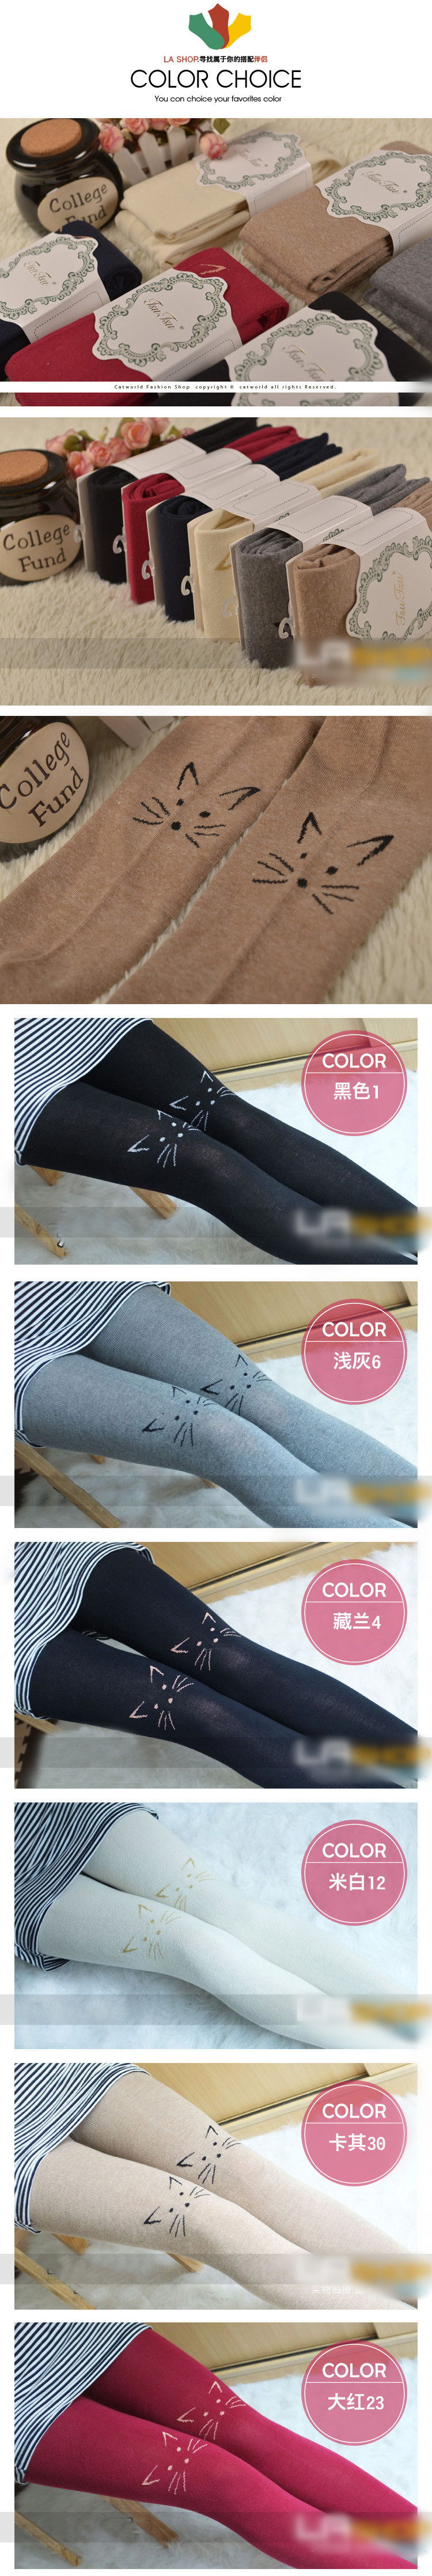 New Arrival Cotton Girls Print Cartoon Tights Japanese Filigree Embroidery Pantyhose Little Cat Stockings_8